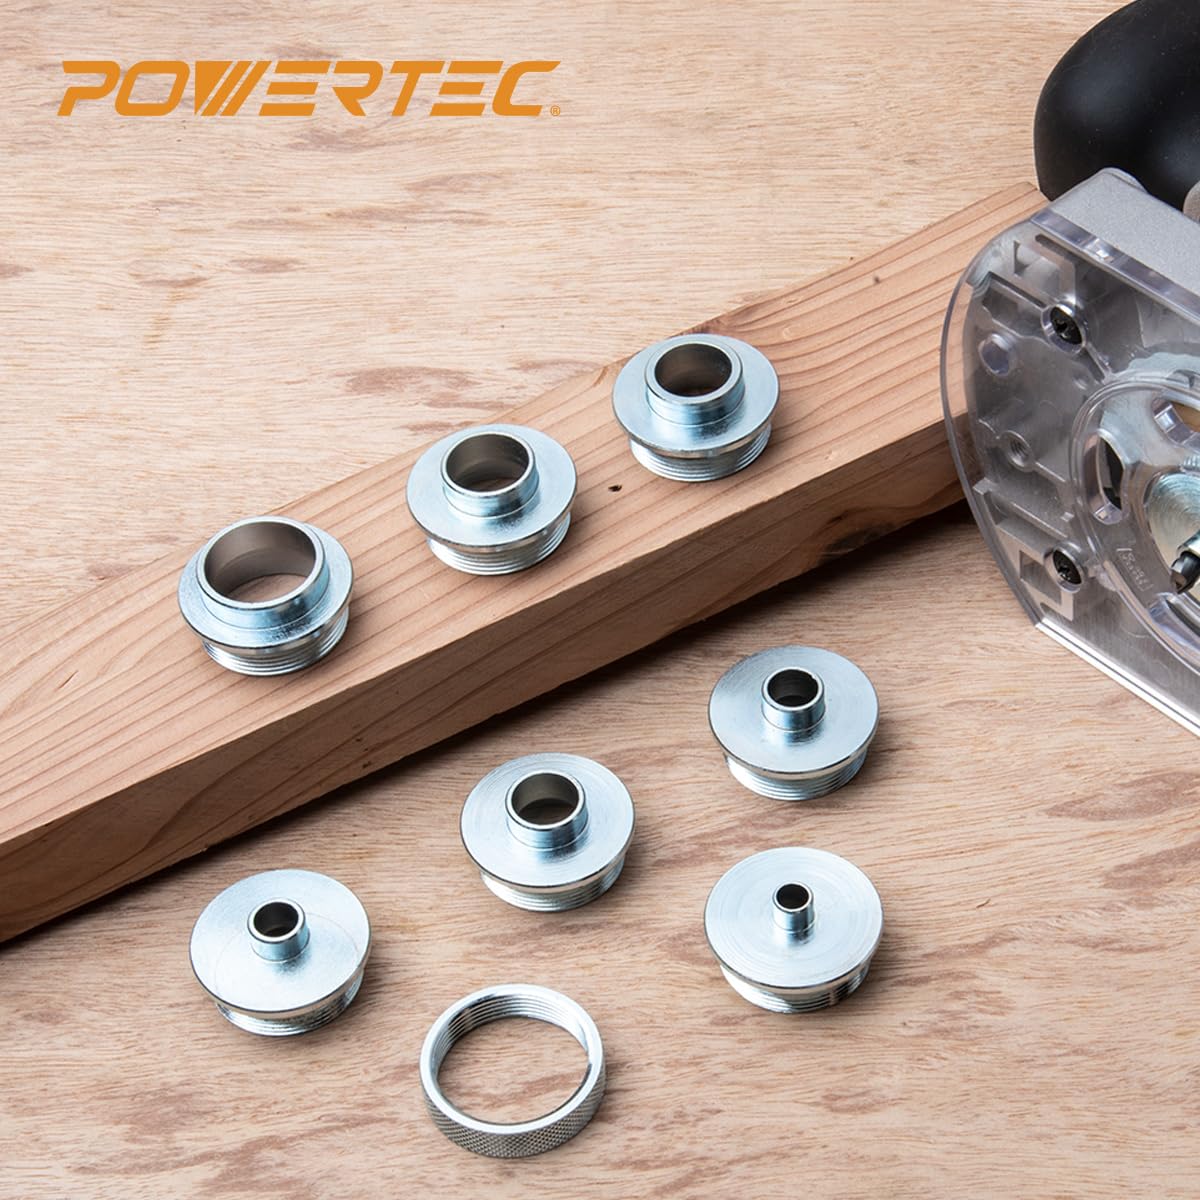 POWERTEC 10Pcs Solid Router Template Bushing Guides Sets 5/16 to 1 Inch with Molded Carrying Case. Fits All Porter Cable Style Router Sub Bases.